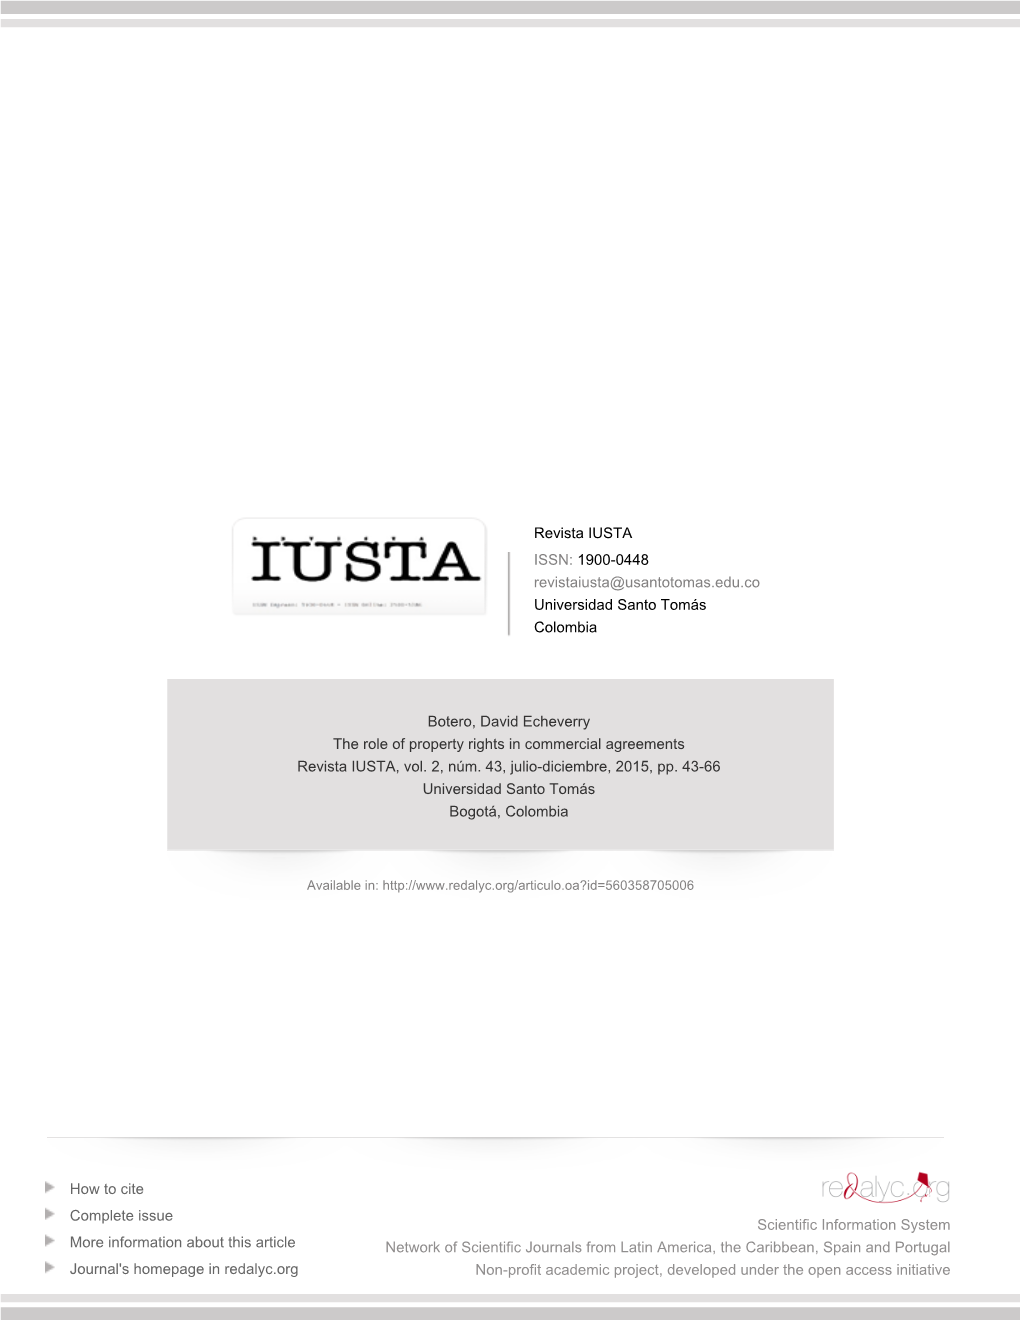 The Role of Property Rights in Commercial Agreements Revista IUSTA, Vol